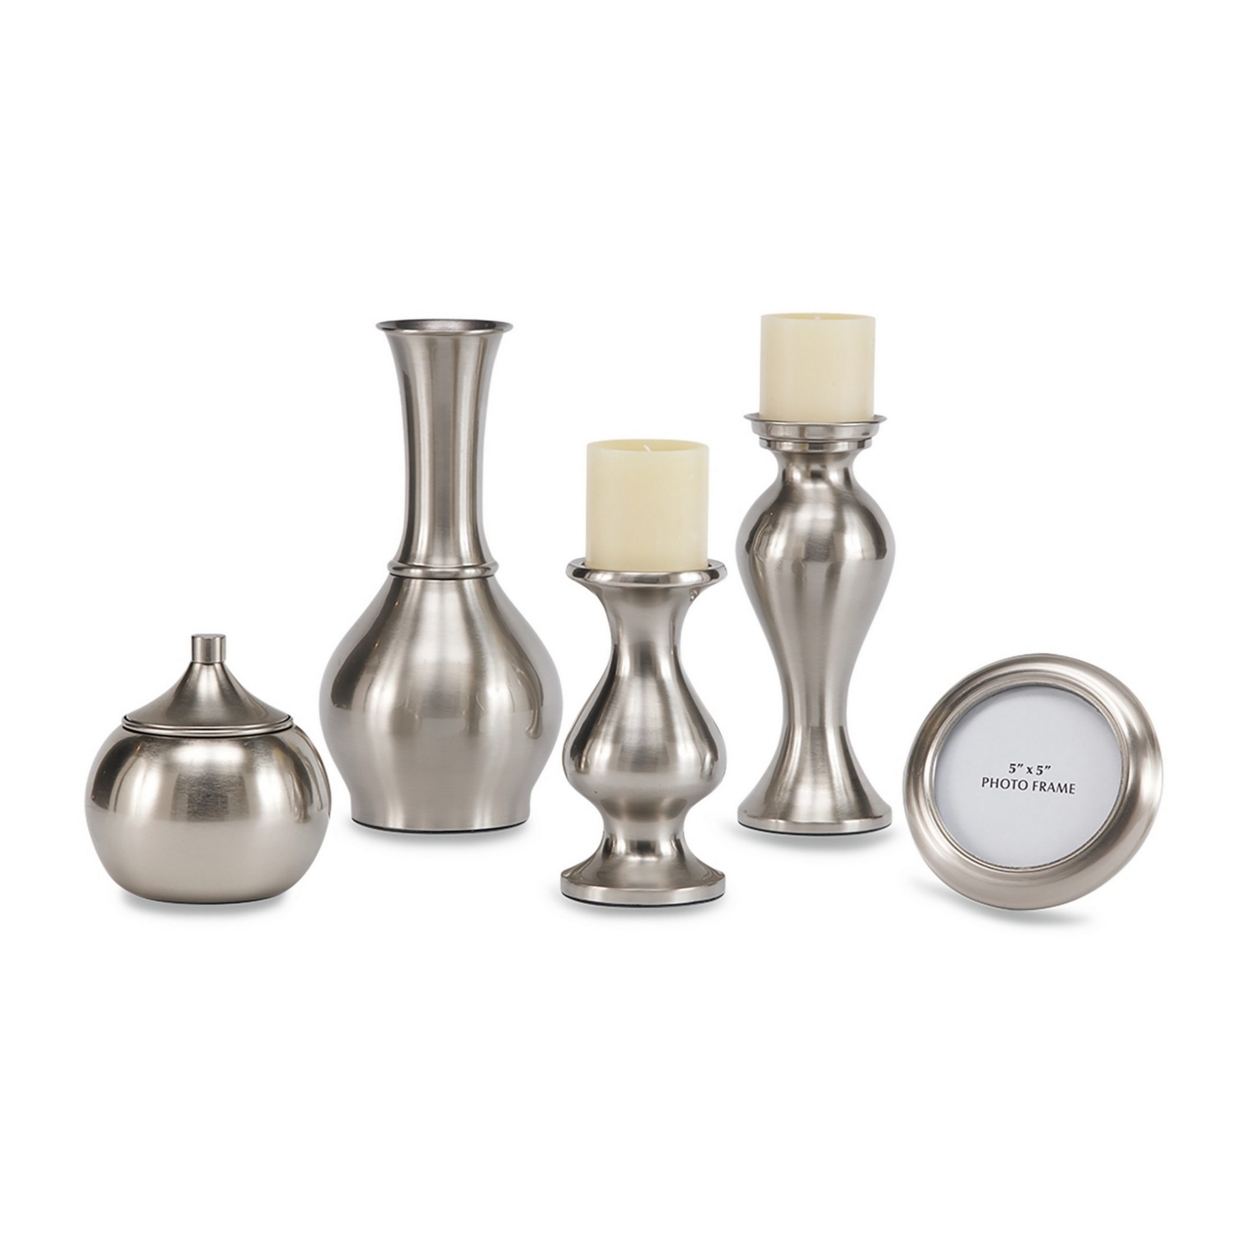 Decorative Metal Accessory Set, Set Of 5 Items, Brushed Silver Finish